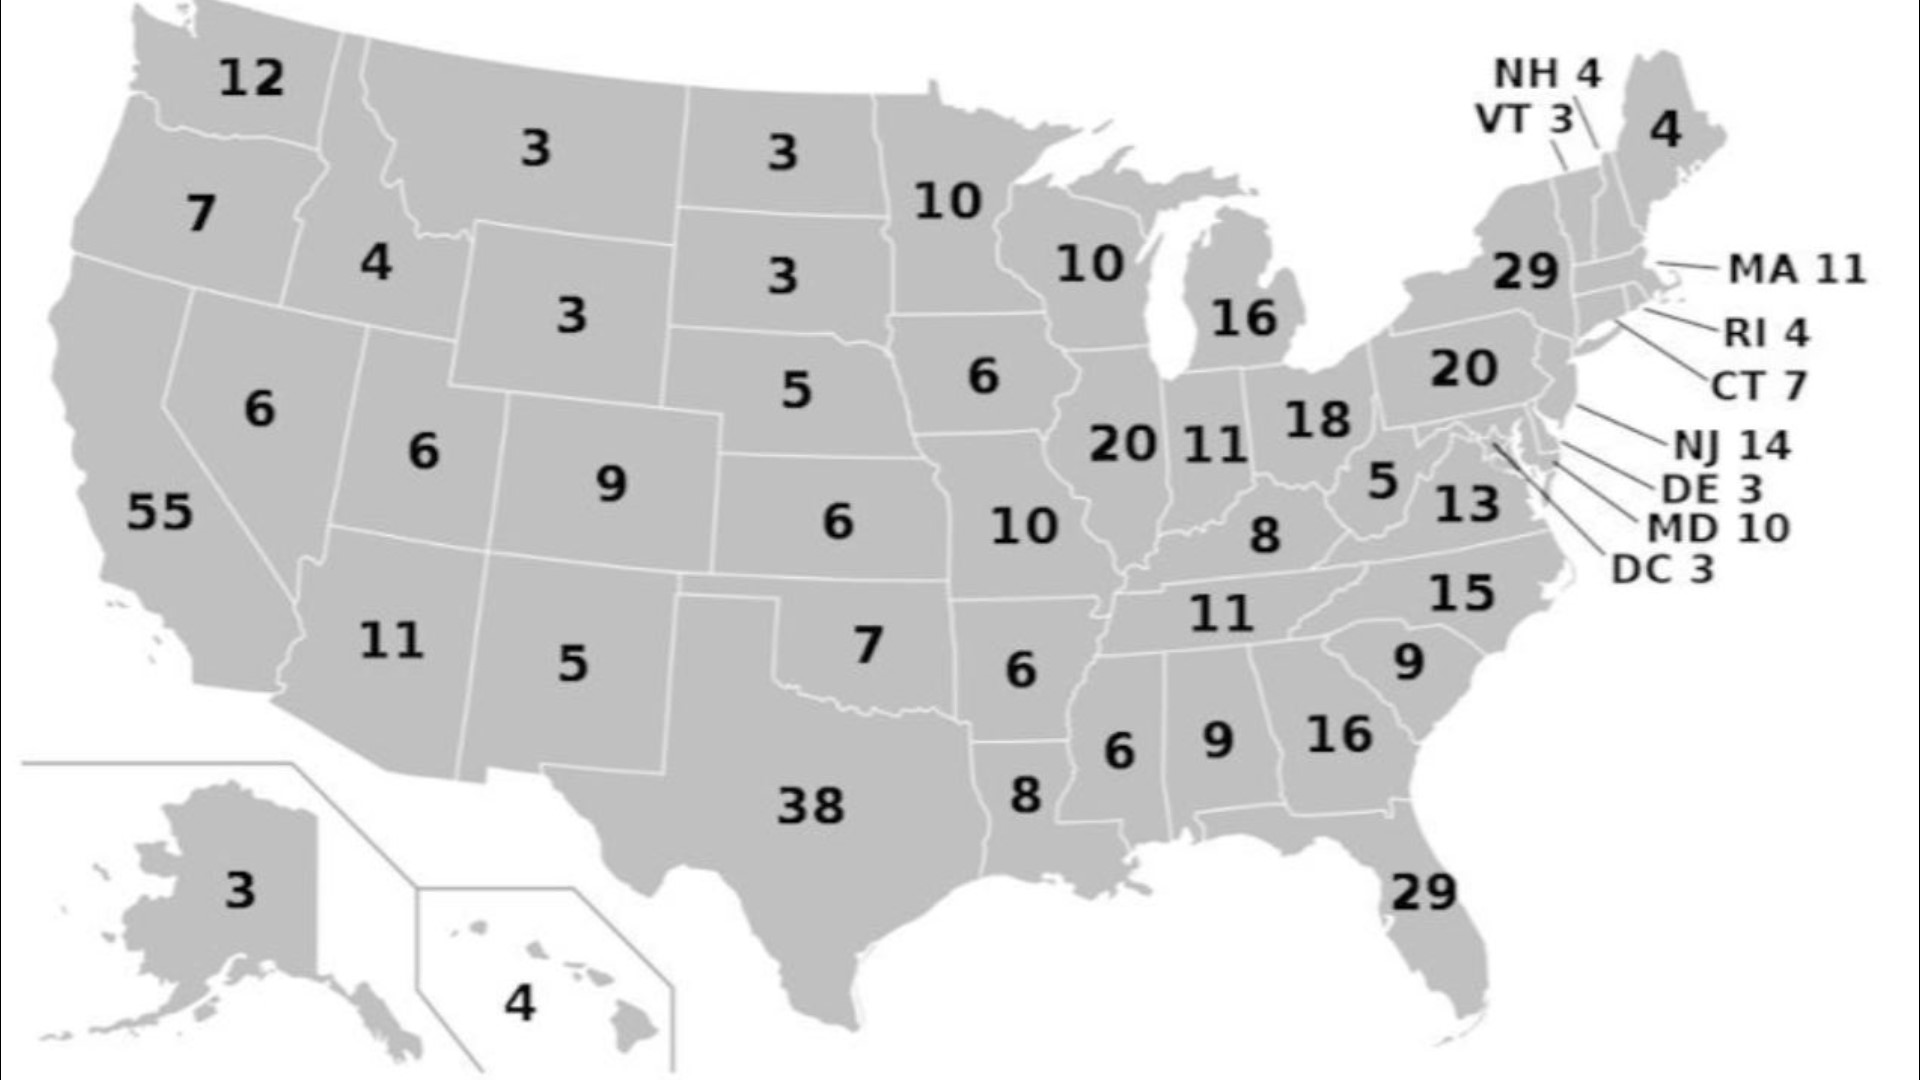 How many electoral votes does Iowa have?